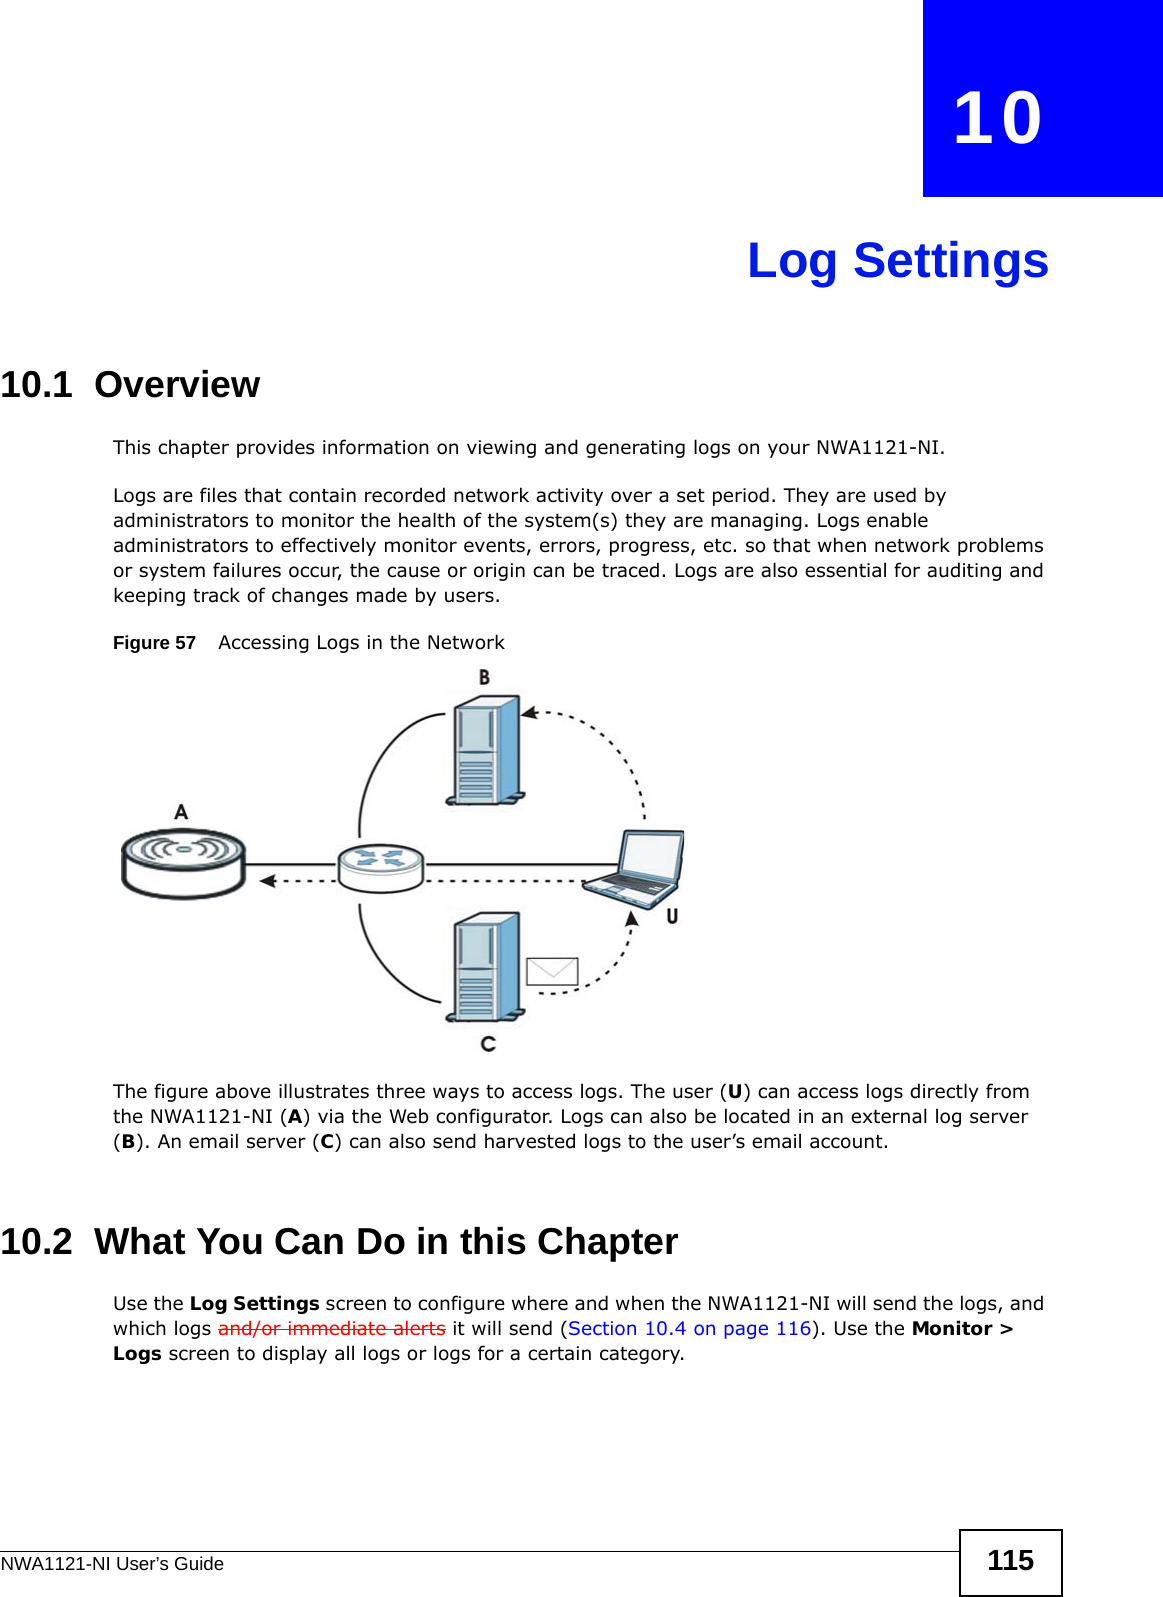 NWA1121-NI User’s Guide 115CHAPTER   10Log Settings10.1  OverviewThis chapter provides information on viewing and generating logs on your NWA1121-NI.Logs are files that contain recorded network activity over a set period. They are used by administrators to monitor the health of the system(s) they are managing. Logs enable administrators to effectively monitor events, errors, progress, etc. so that when network problems or system failures occur, the cause or origin can be traced. Logs are also essential for auditing and keeping track of changes made by users. Figure 57    Accessing Logs in the NetworkThe figure above illustrates three ways to access logs. The user (U) can access logs directly from the NWA1121-NI (A) via the Web configurator. Logs can also be located in an external log server (B). An email server (C) can also send harvested logs to the user’s email account. 10.2  What You Can Do in this ChapterUse the Log Settings screen to configure where and when the NWA1121-NI will send the logs, and which logs and/or immediate alerts it will send (Section 10.4 on page 116). Use the Monitor &gt; Logs screen to display all logs or logs for a certain category.